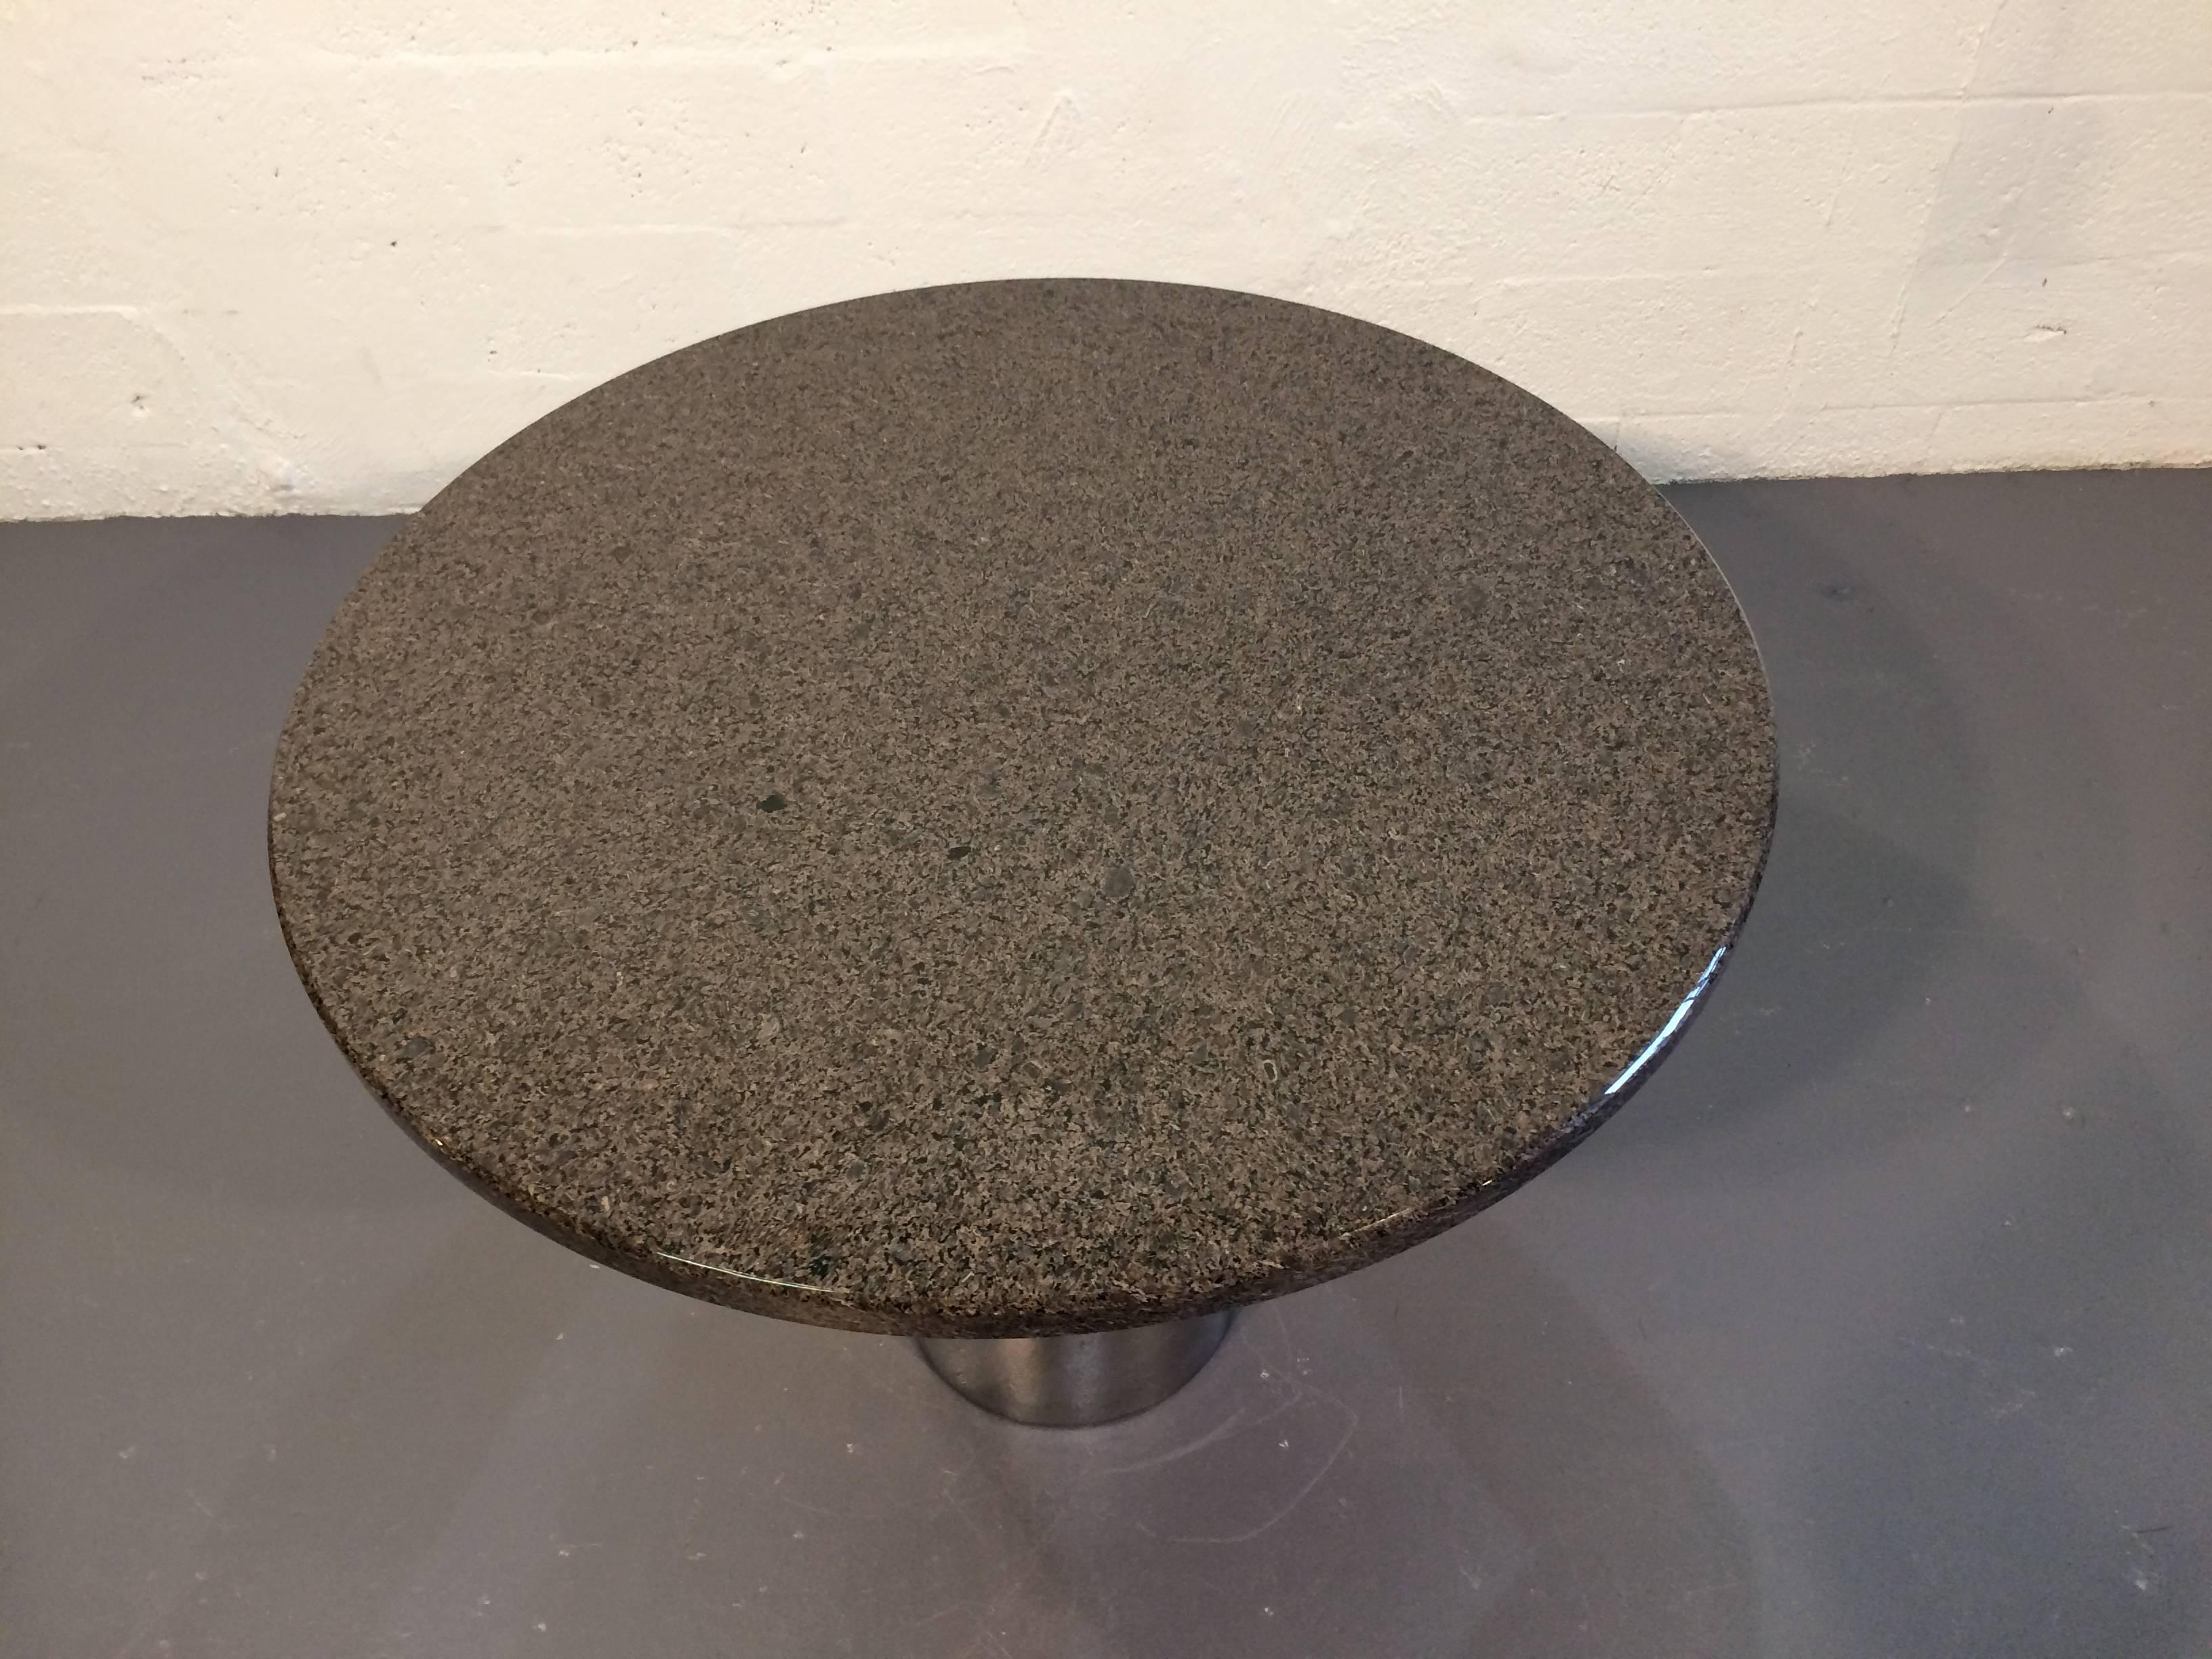 Stainless Steel and Granite Centre Table or Dining Table In Good Condition For Sale In Miami, FL